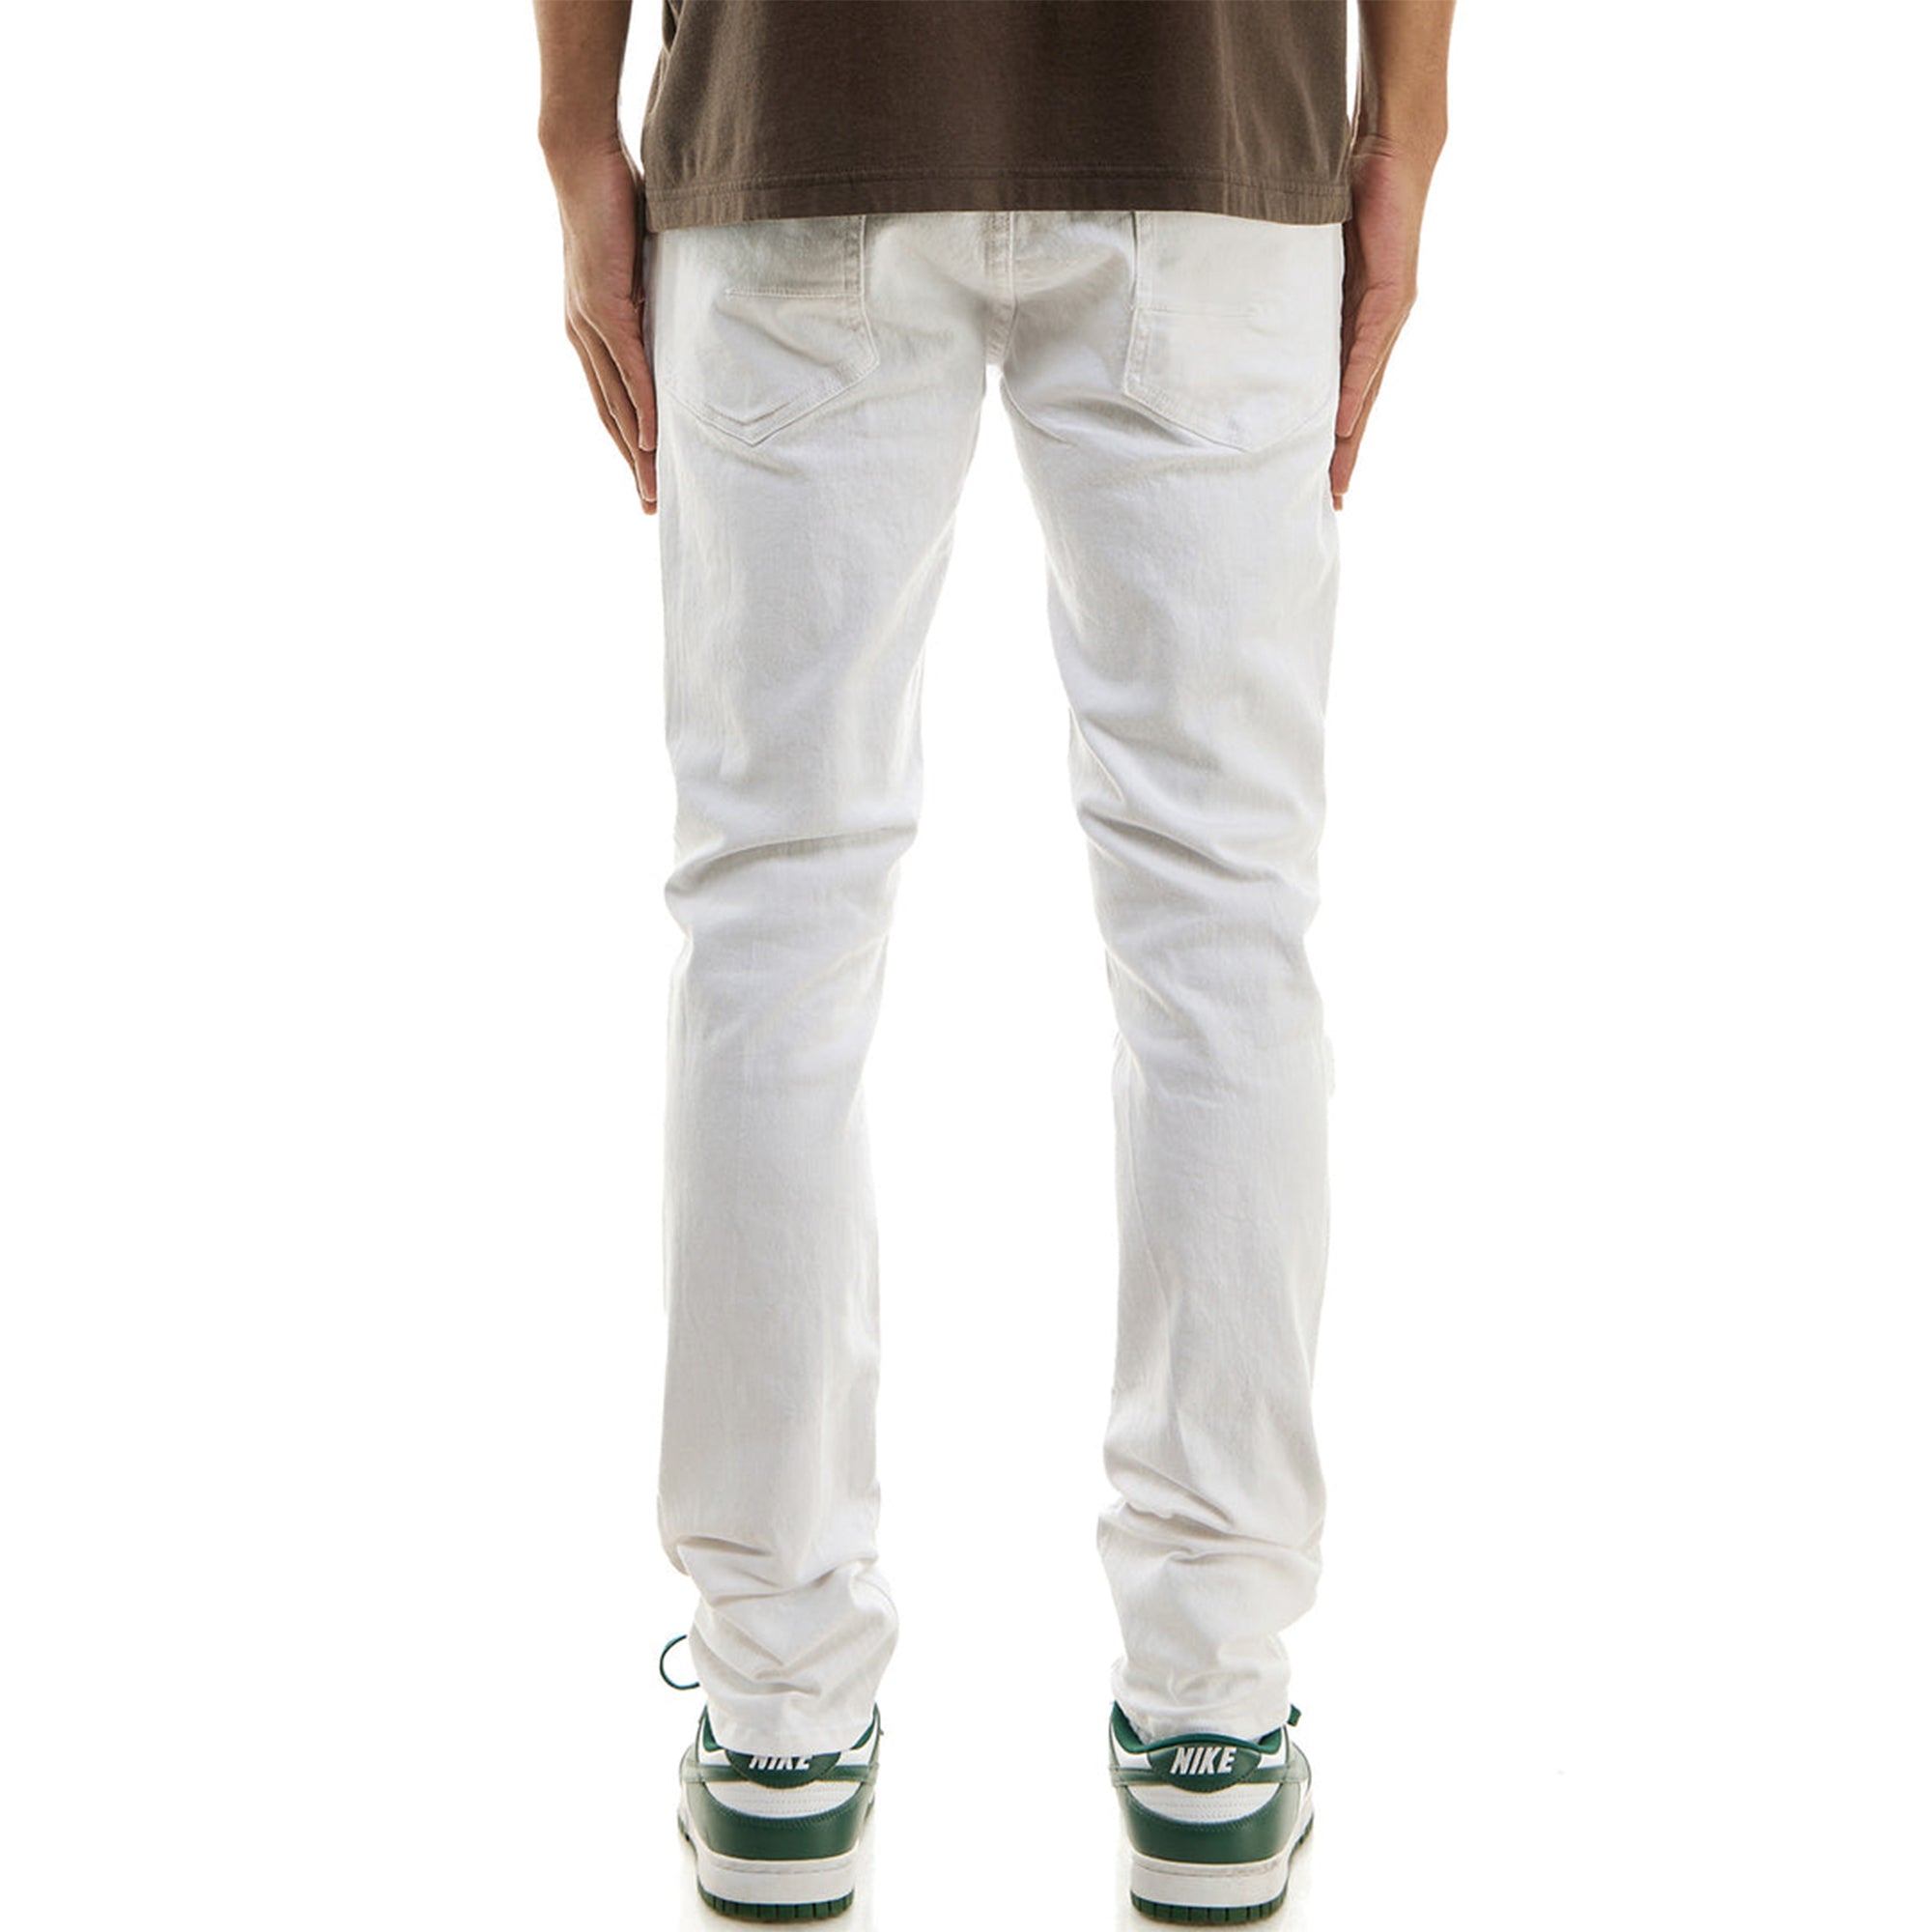 KDNK Men Under Patched More Skinny Jeans (White)-Nexus Clothing